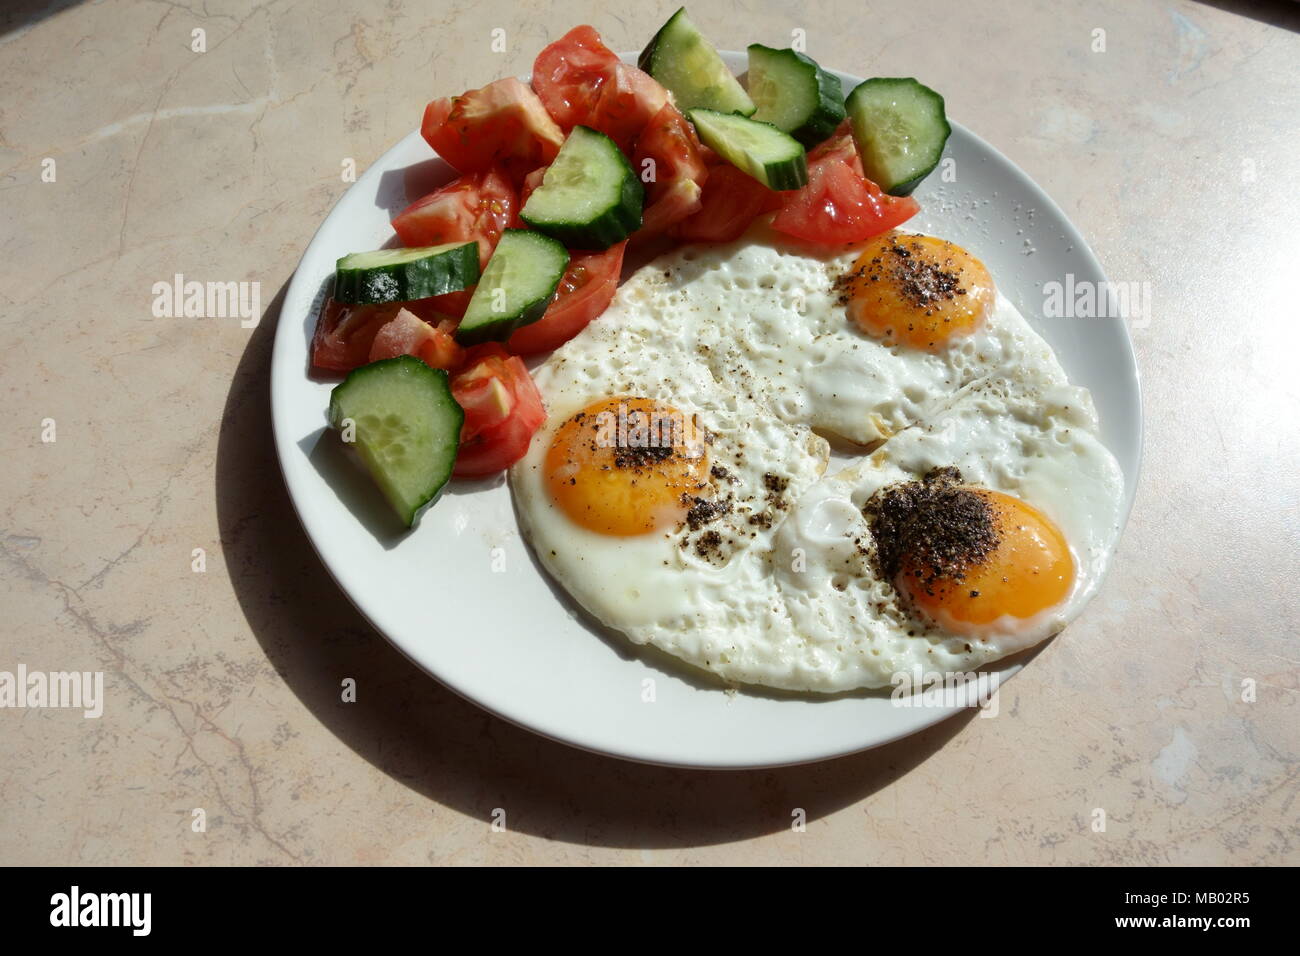 Fried eggs with raw sliced cucumber and tomato on the side Stock Photo